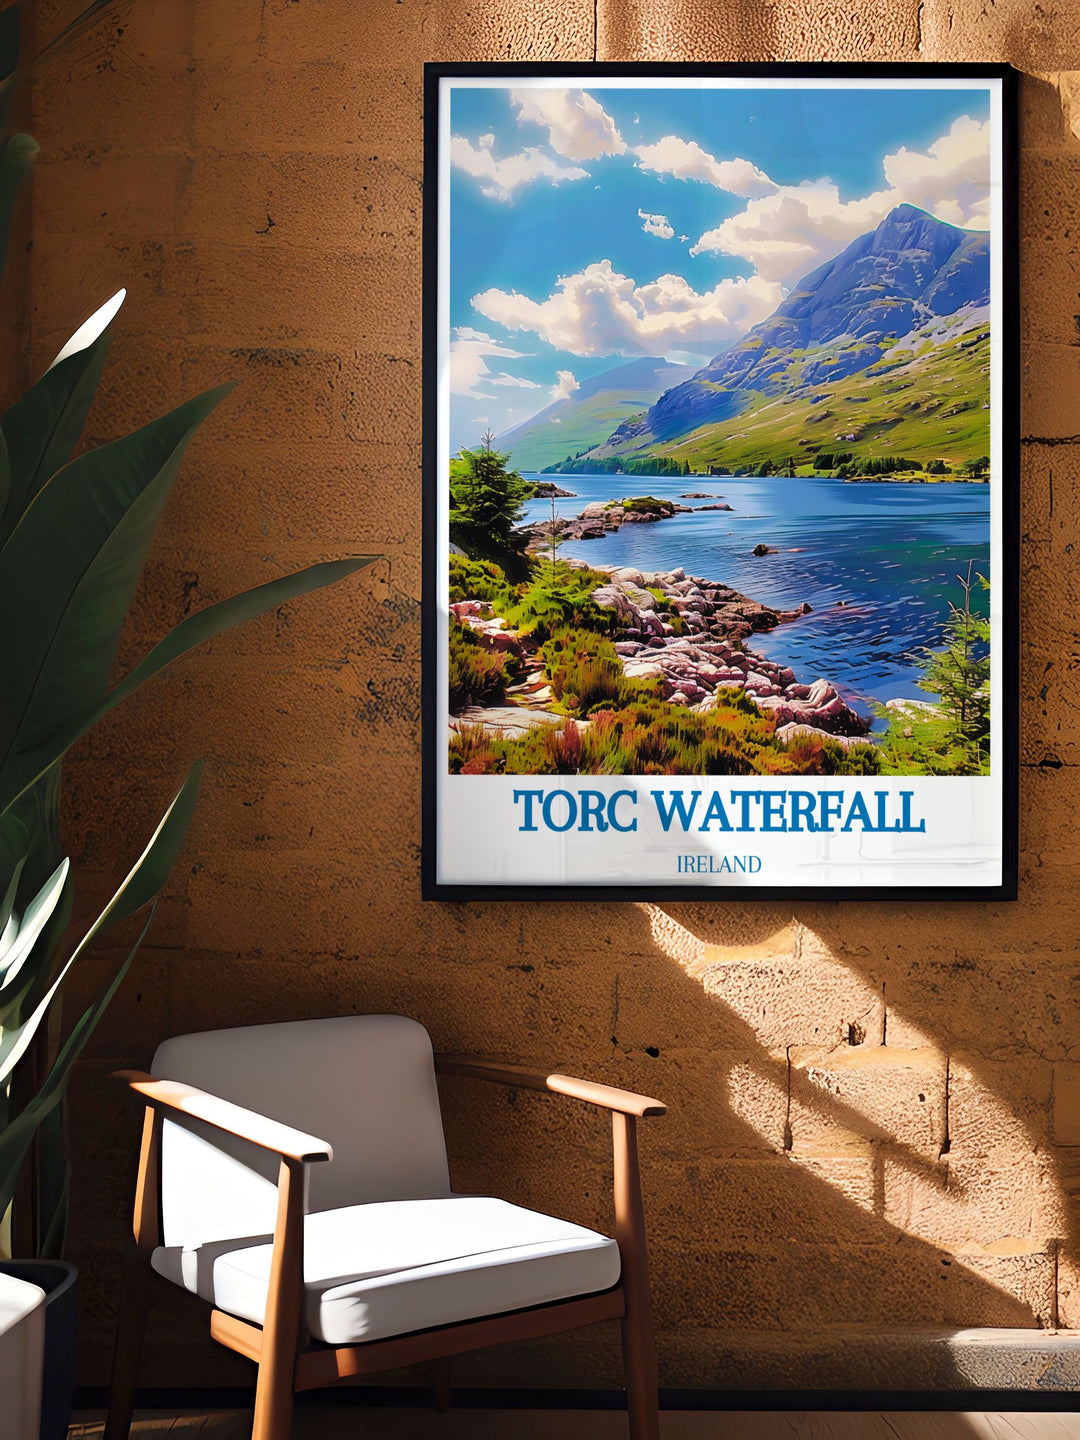 Discover the historical allure and picturesque setting of Torc Waterfall with this beautifully illustrated art print.